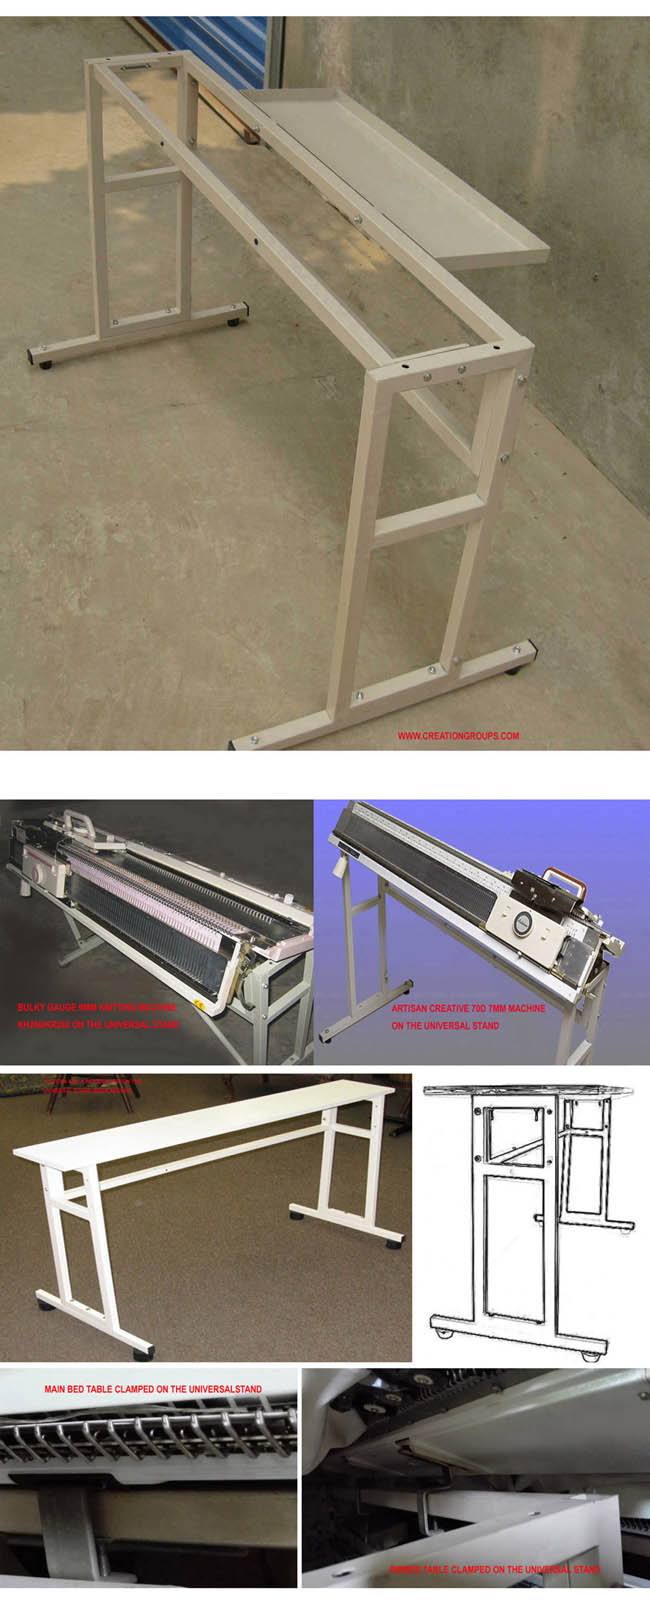 New Universal Knitting Machine Stand/Table for All Brother Silver Reed Knitting Machine